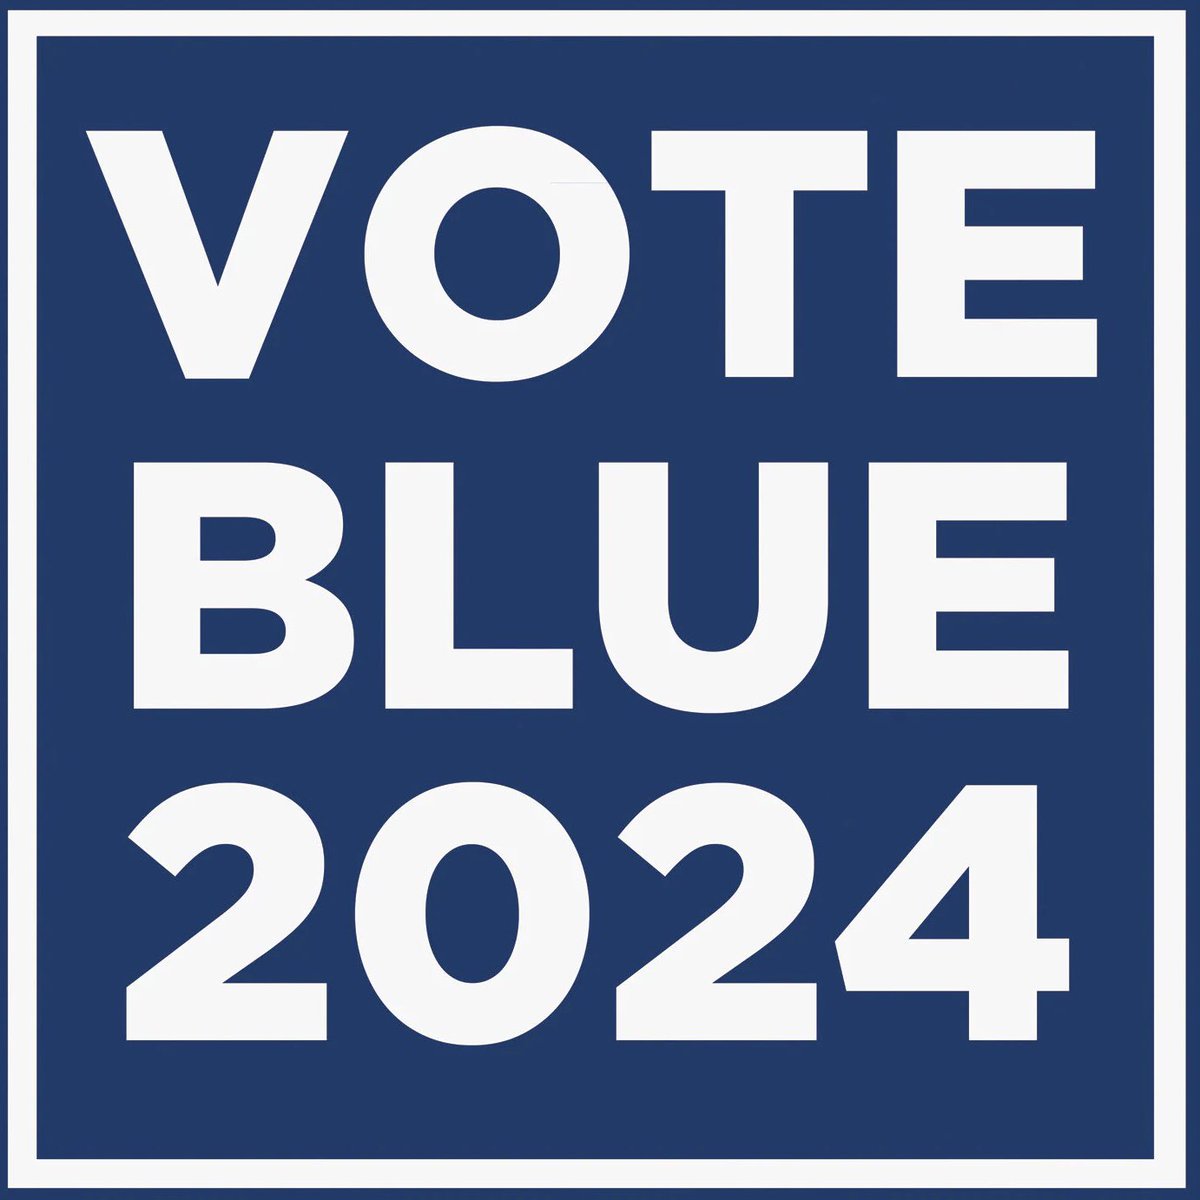 Drop a 💙 if you want to meet more Friends

Like and Repost

We’re Stronger Together💯

Vote Blue 2024🇺🇸